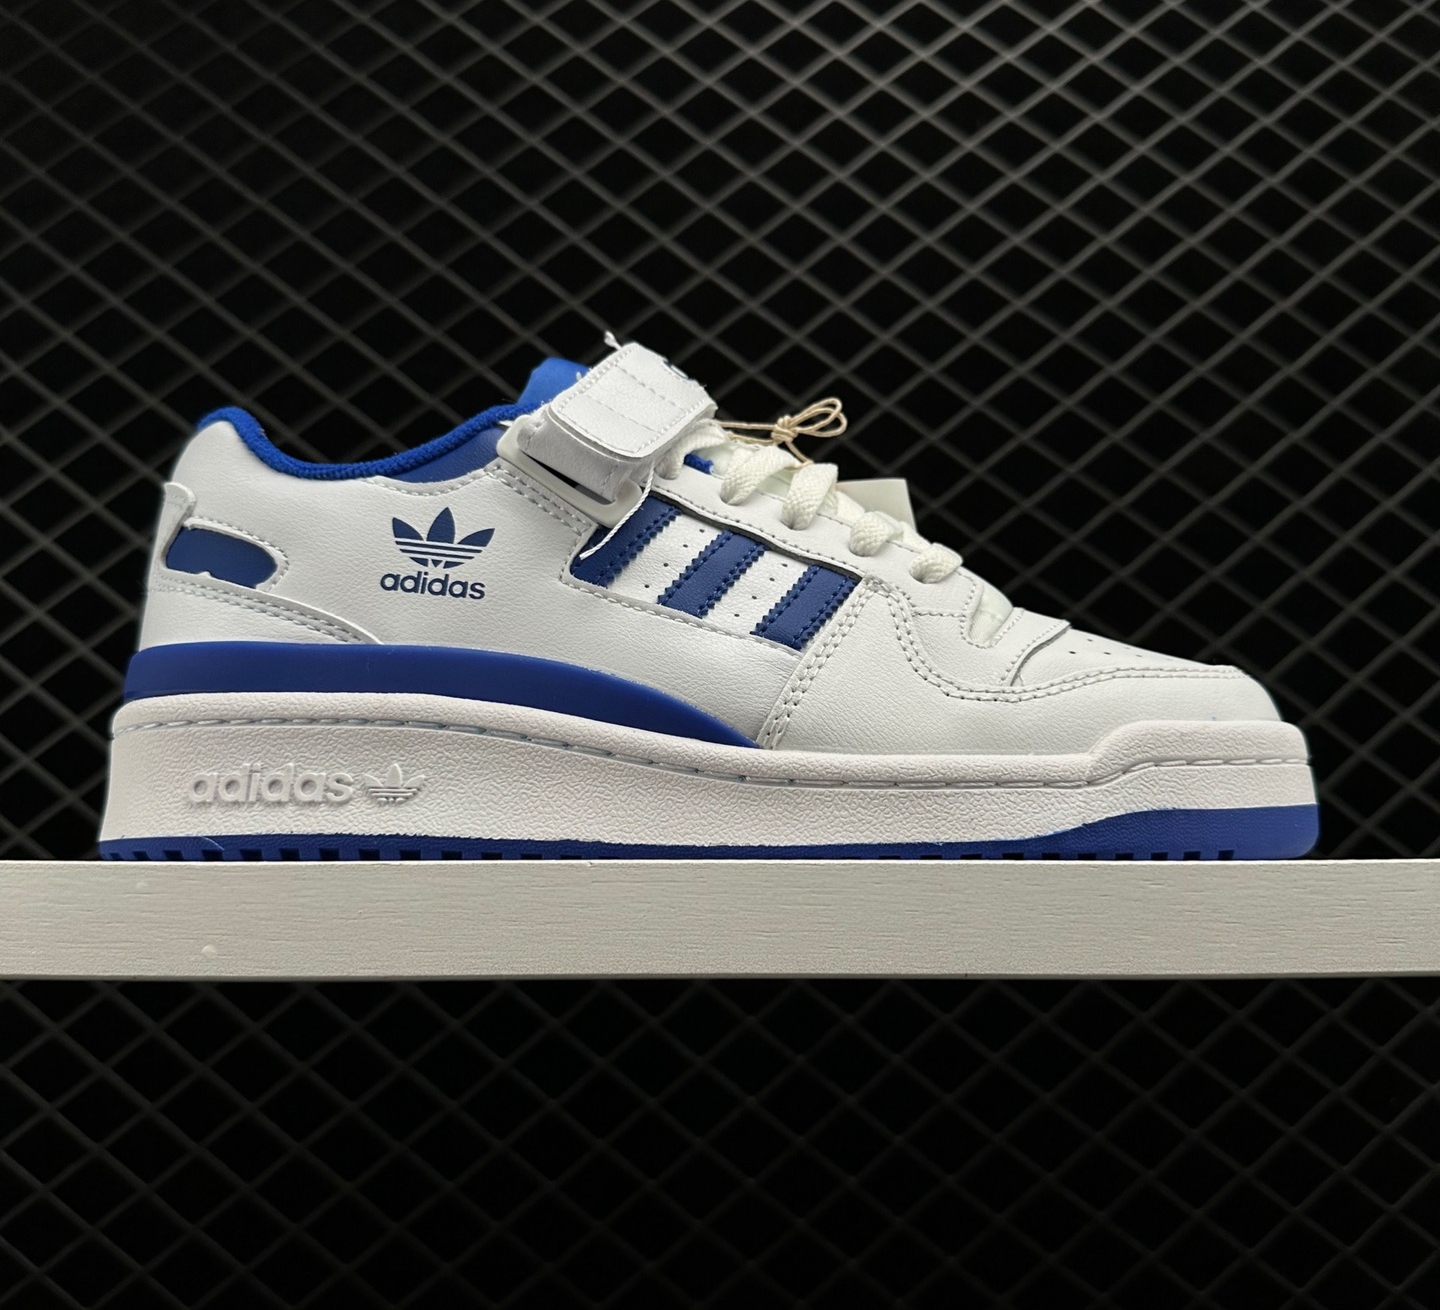 Adidas Forum Low White Royal Blue Sneakers FY7756